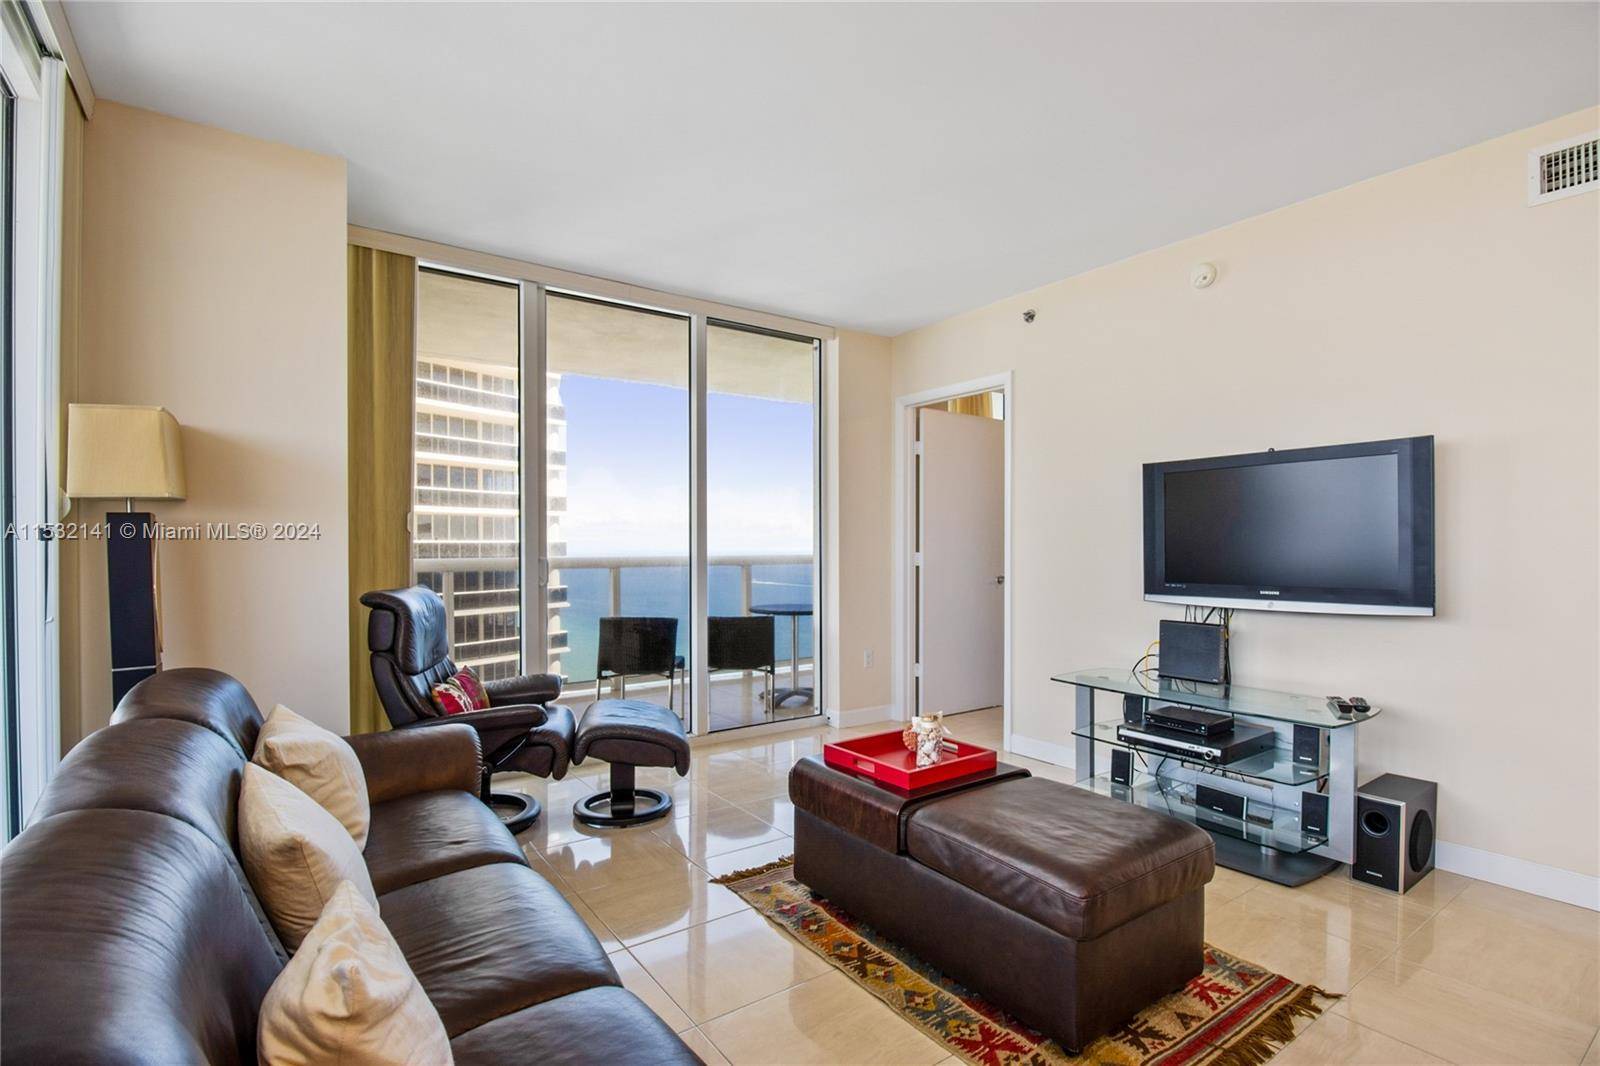 Completely furnished 2 bed 2 baths, South West exposure, master suite has Jacuzzi tub, California closets, second bedroom overlooking the ocean.